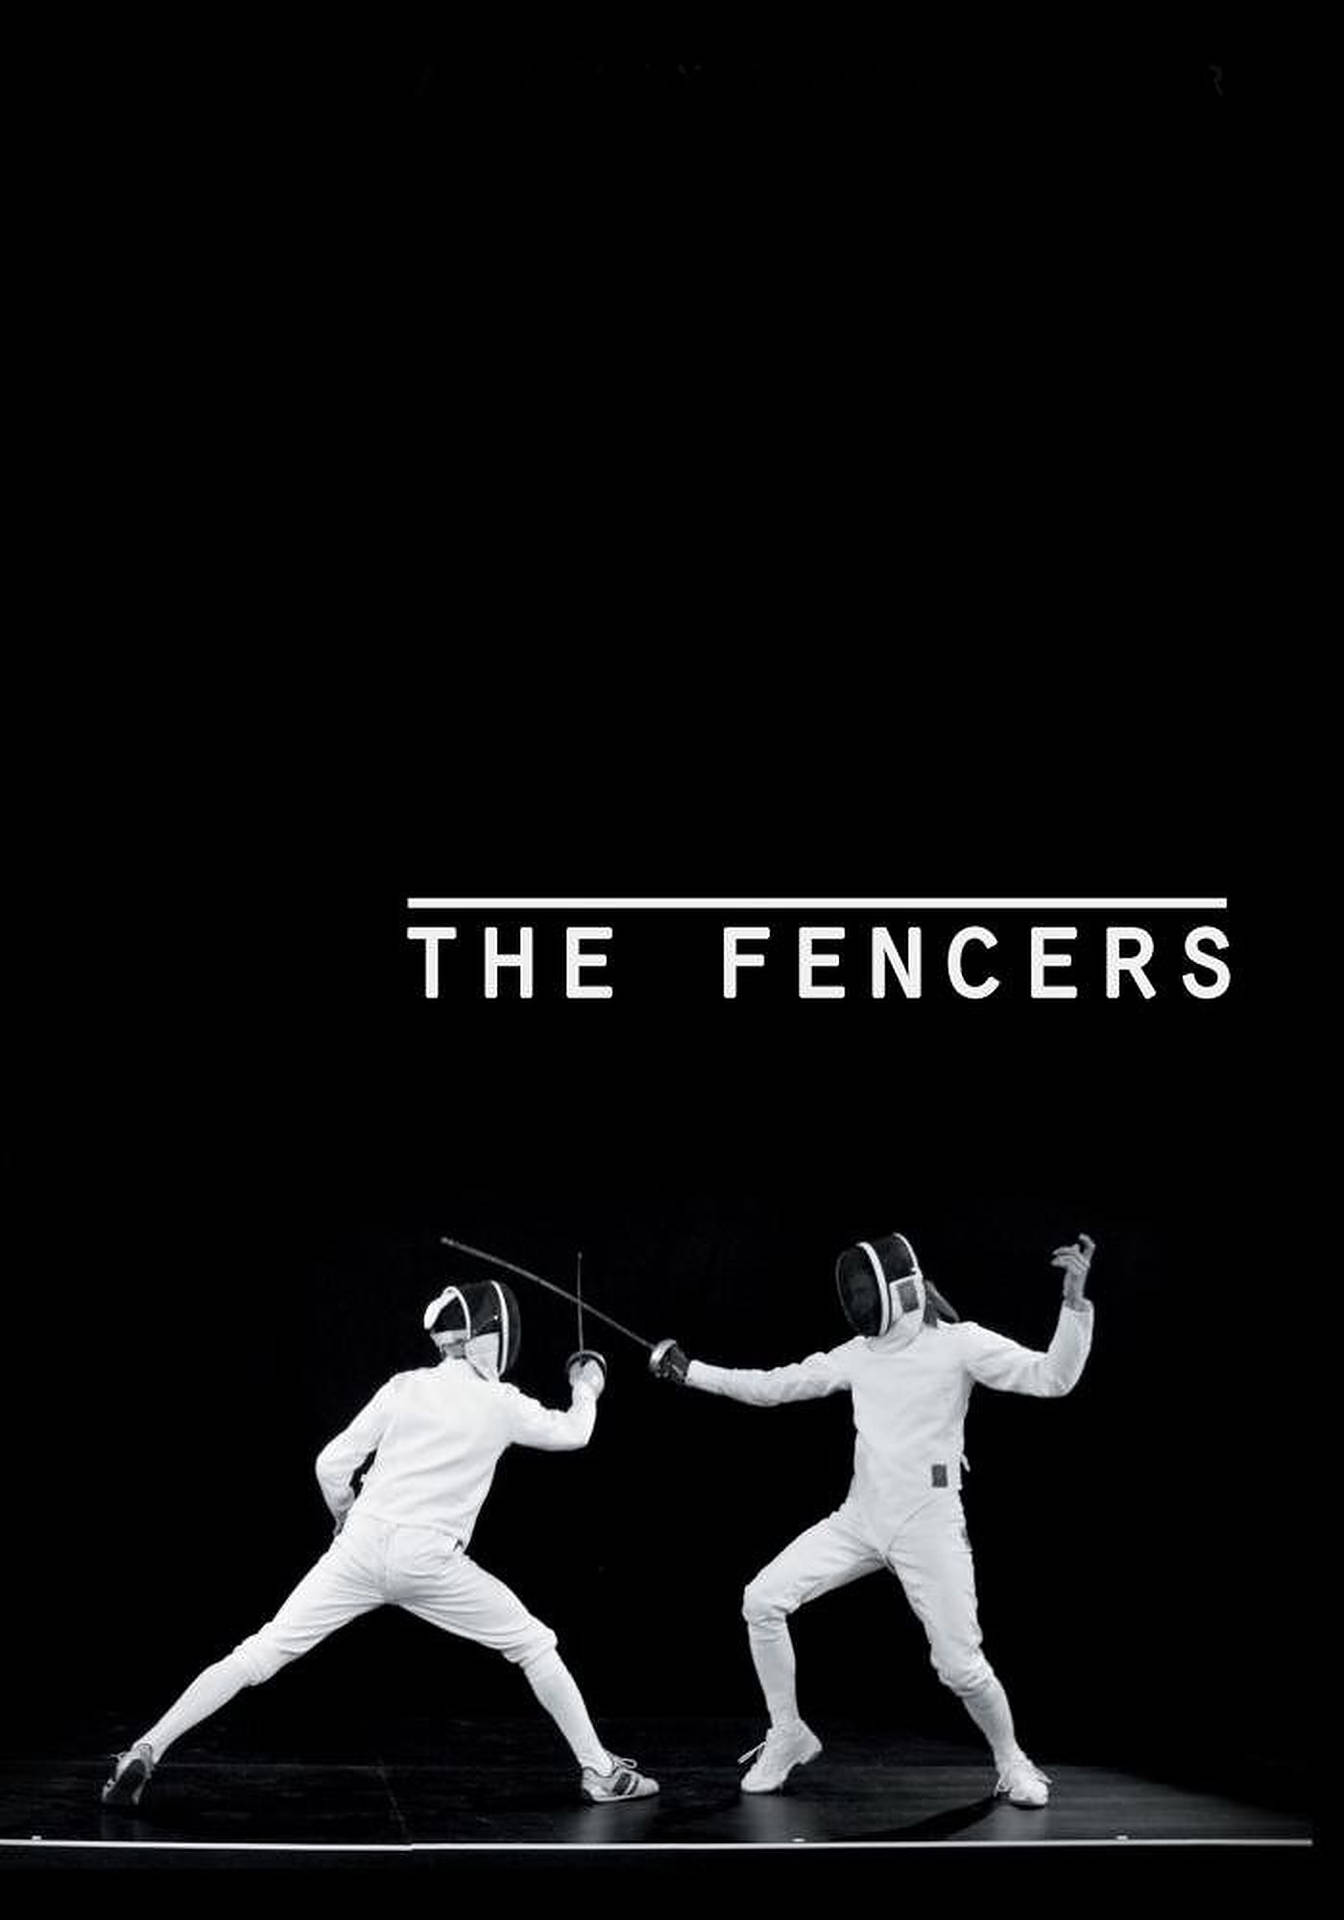 The Fencers Fencing Wallpaper